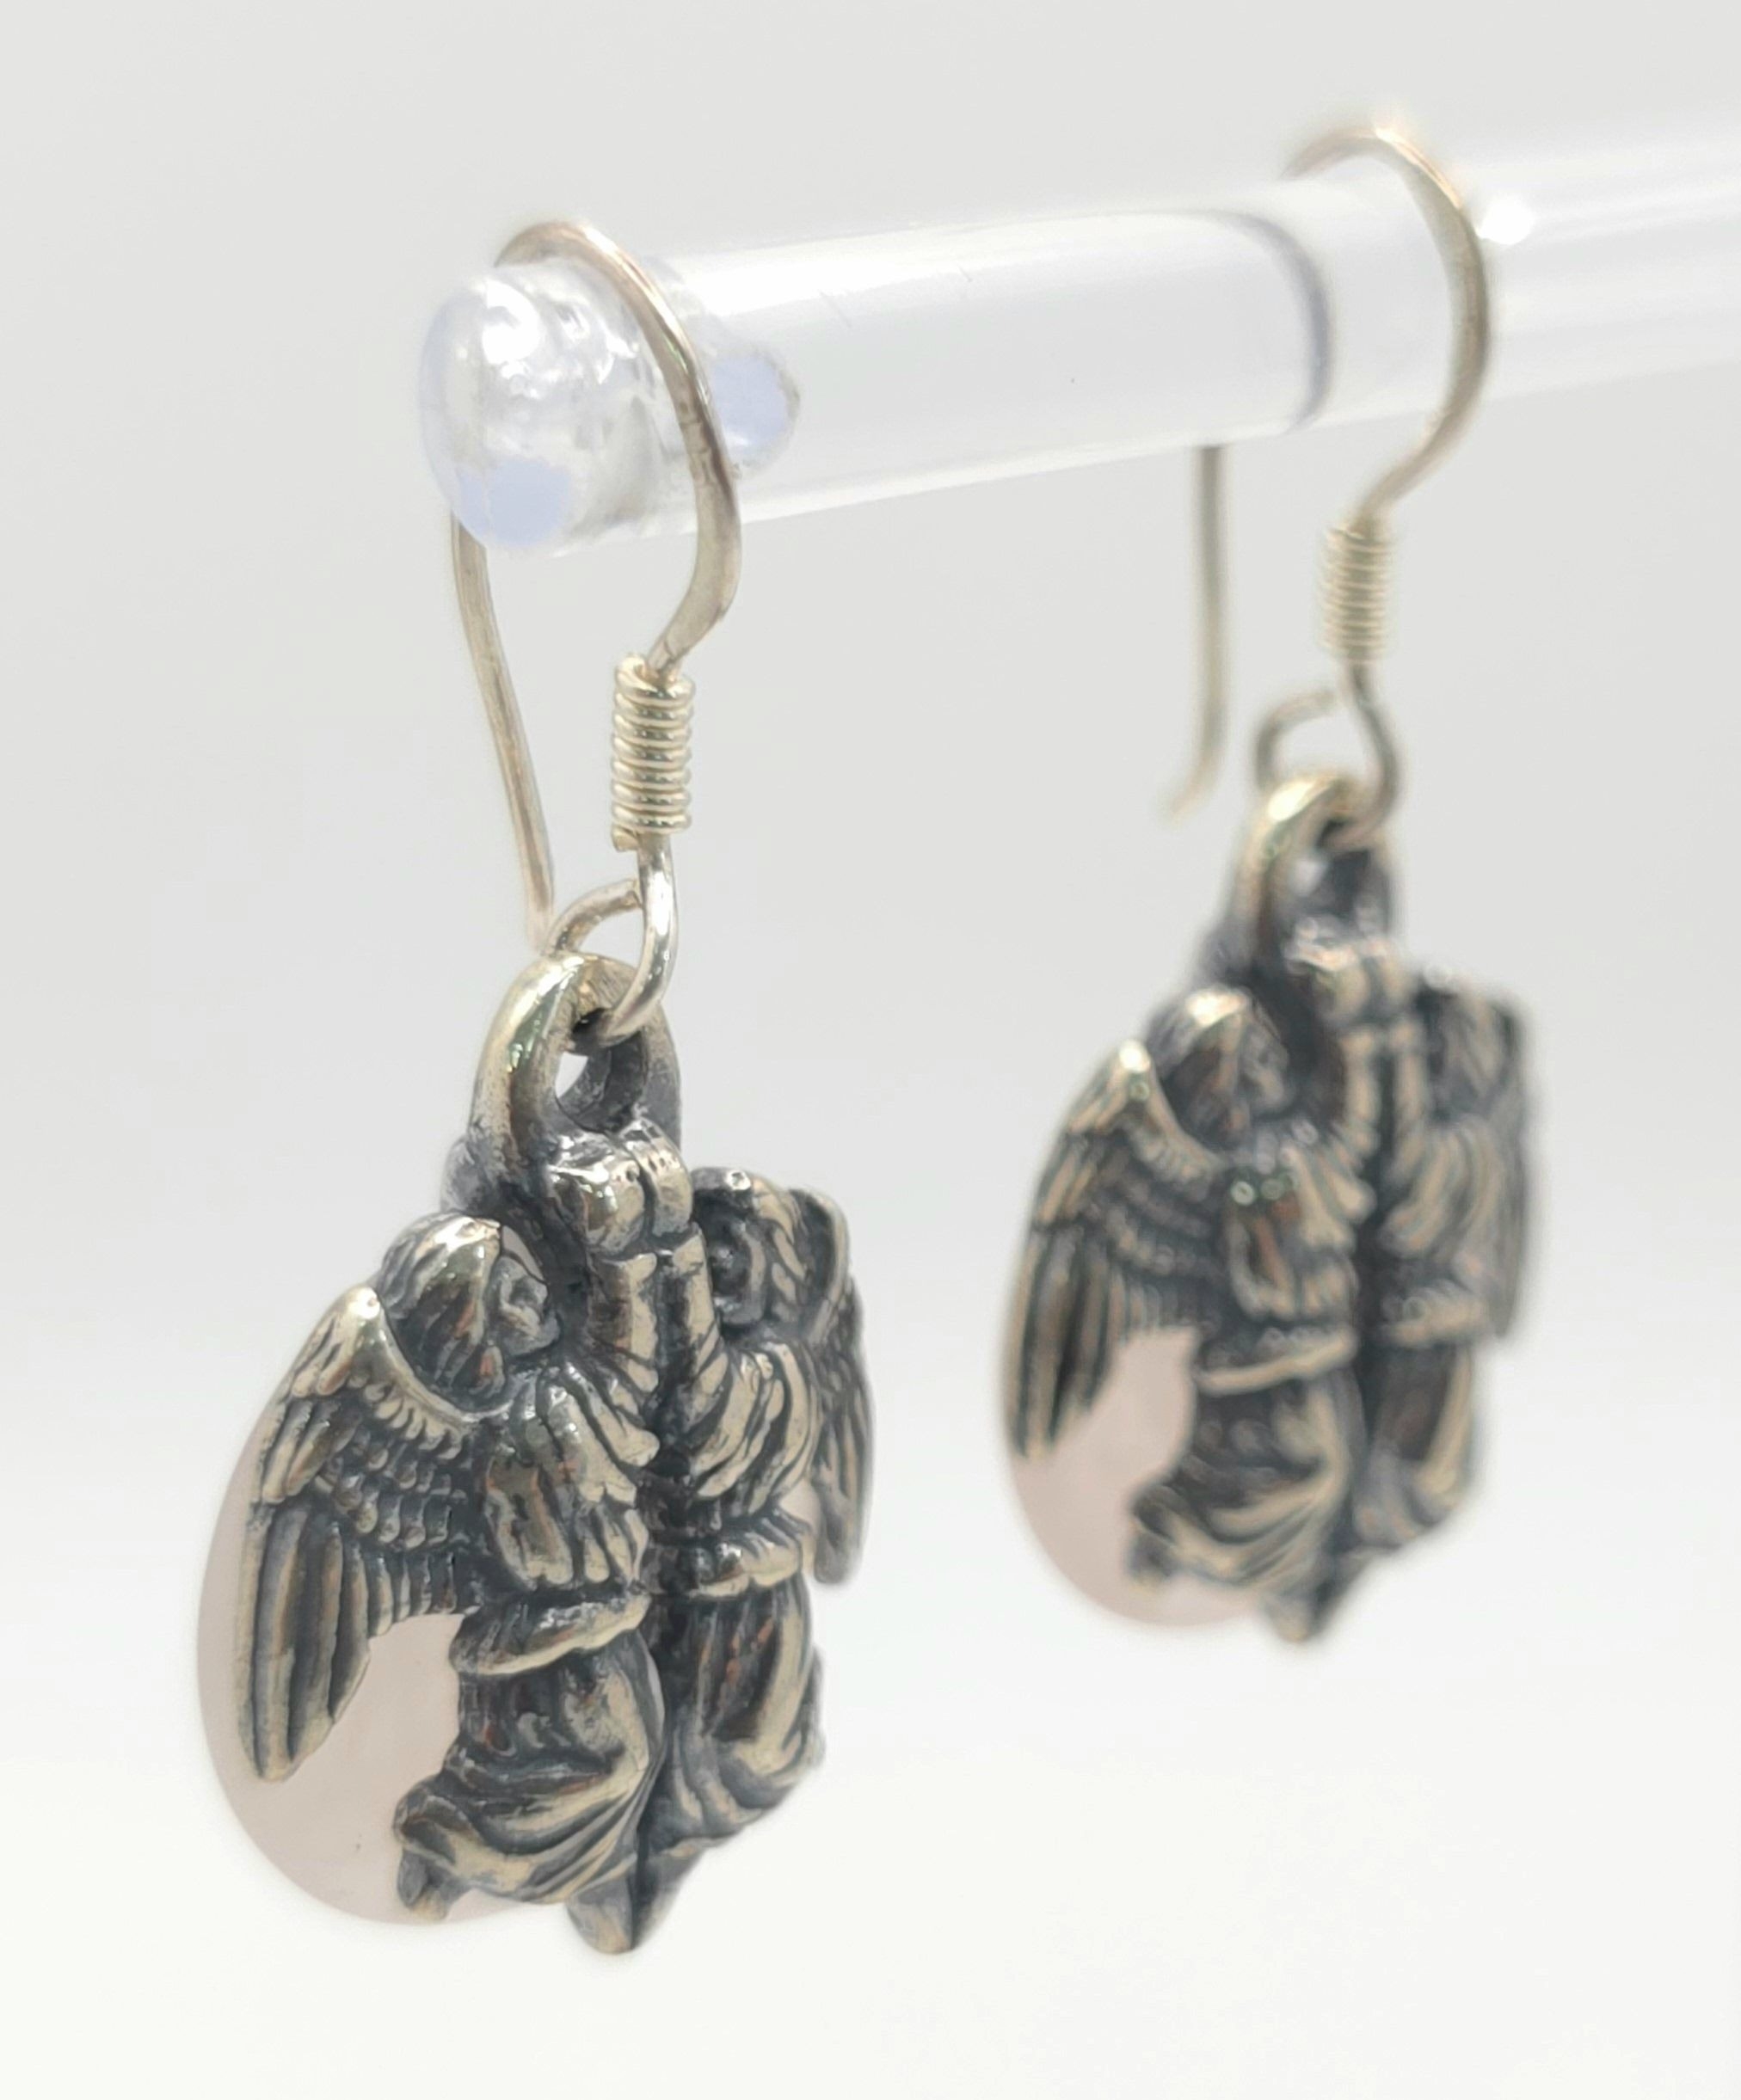 A Unique Pair of Sterling Silver and Rose Quartz Angel Design Earrings. 3cm Drop. 1.5cm Wide. - Image 3 of 5